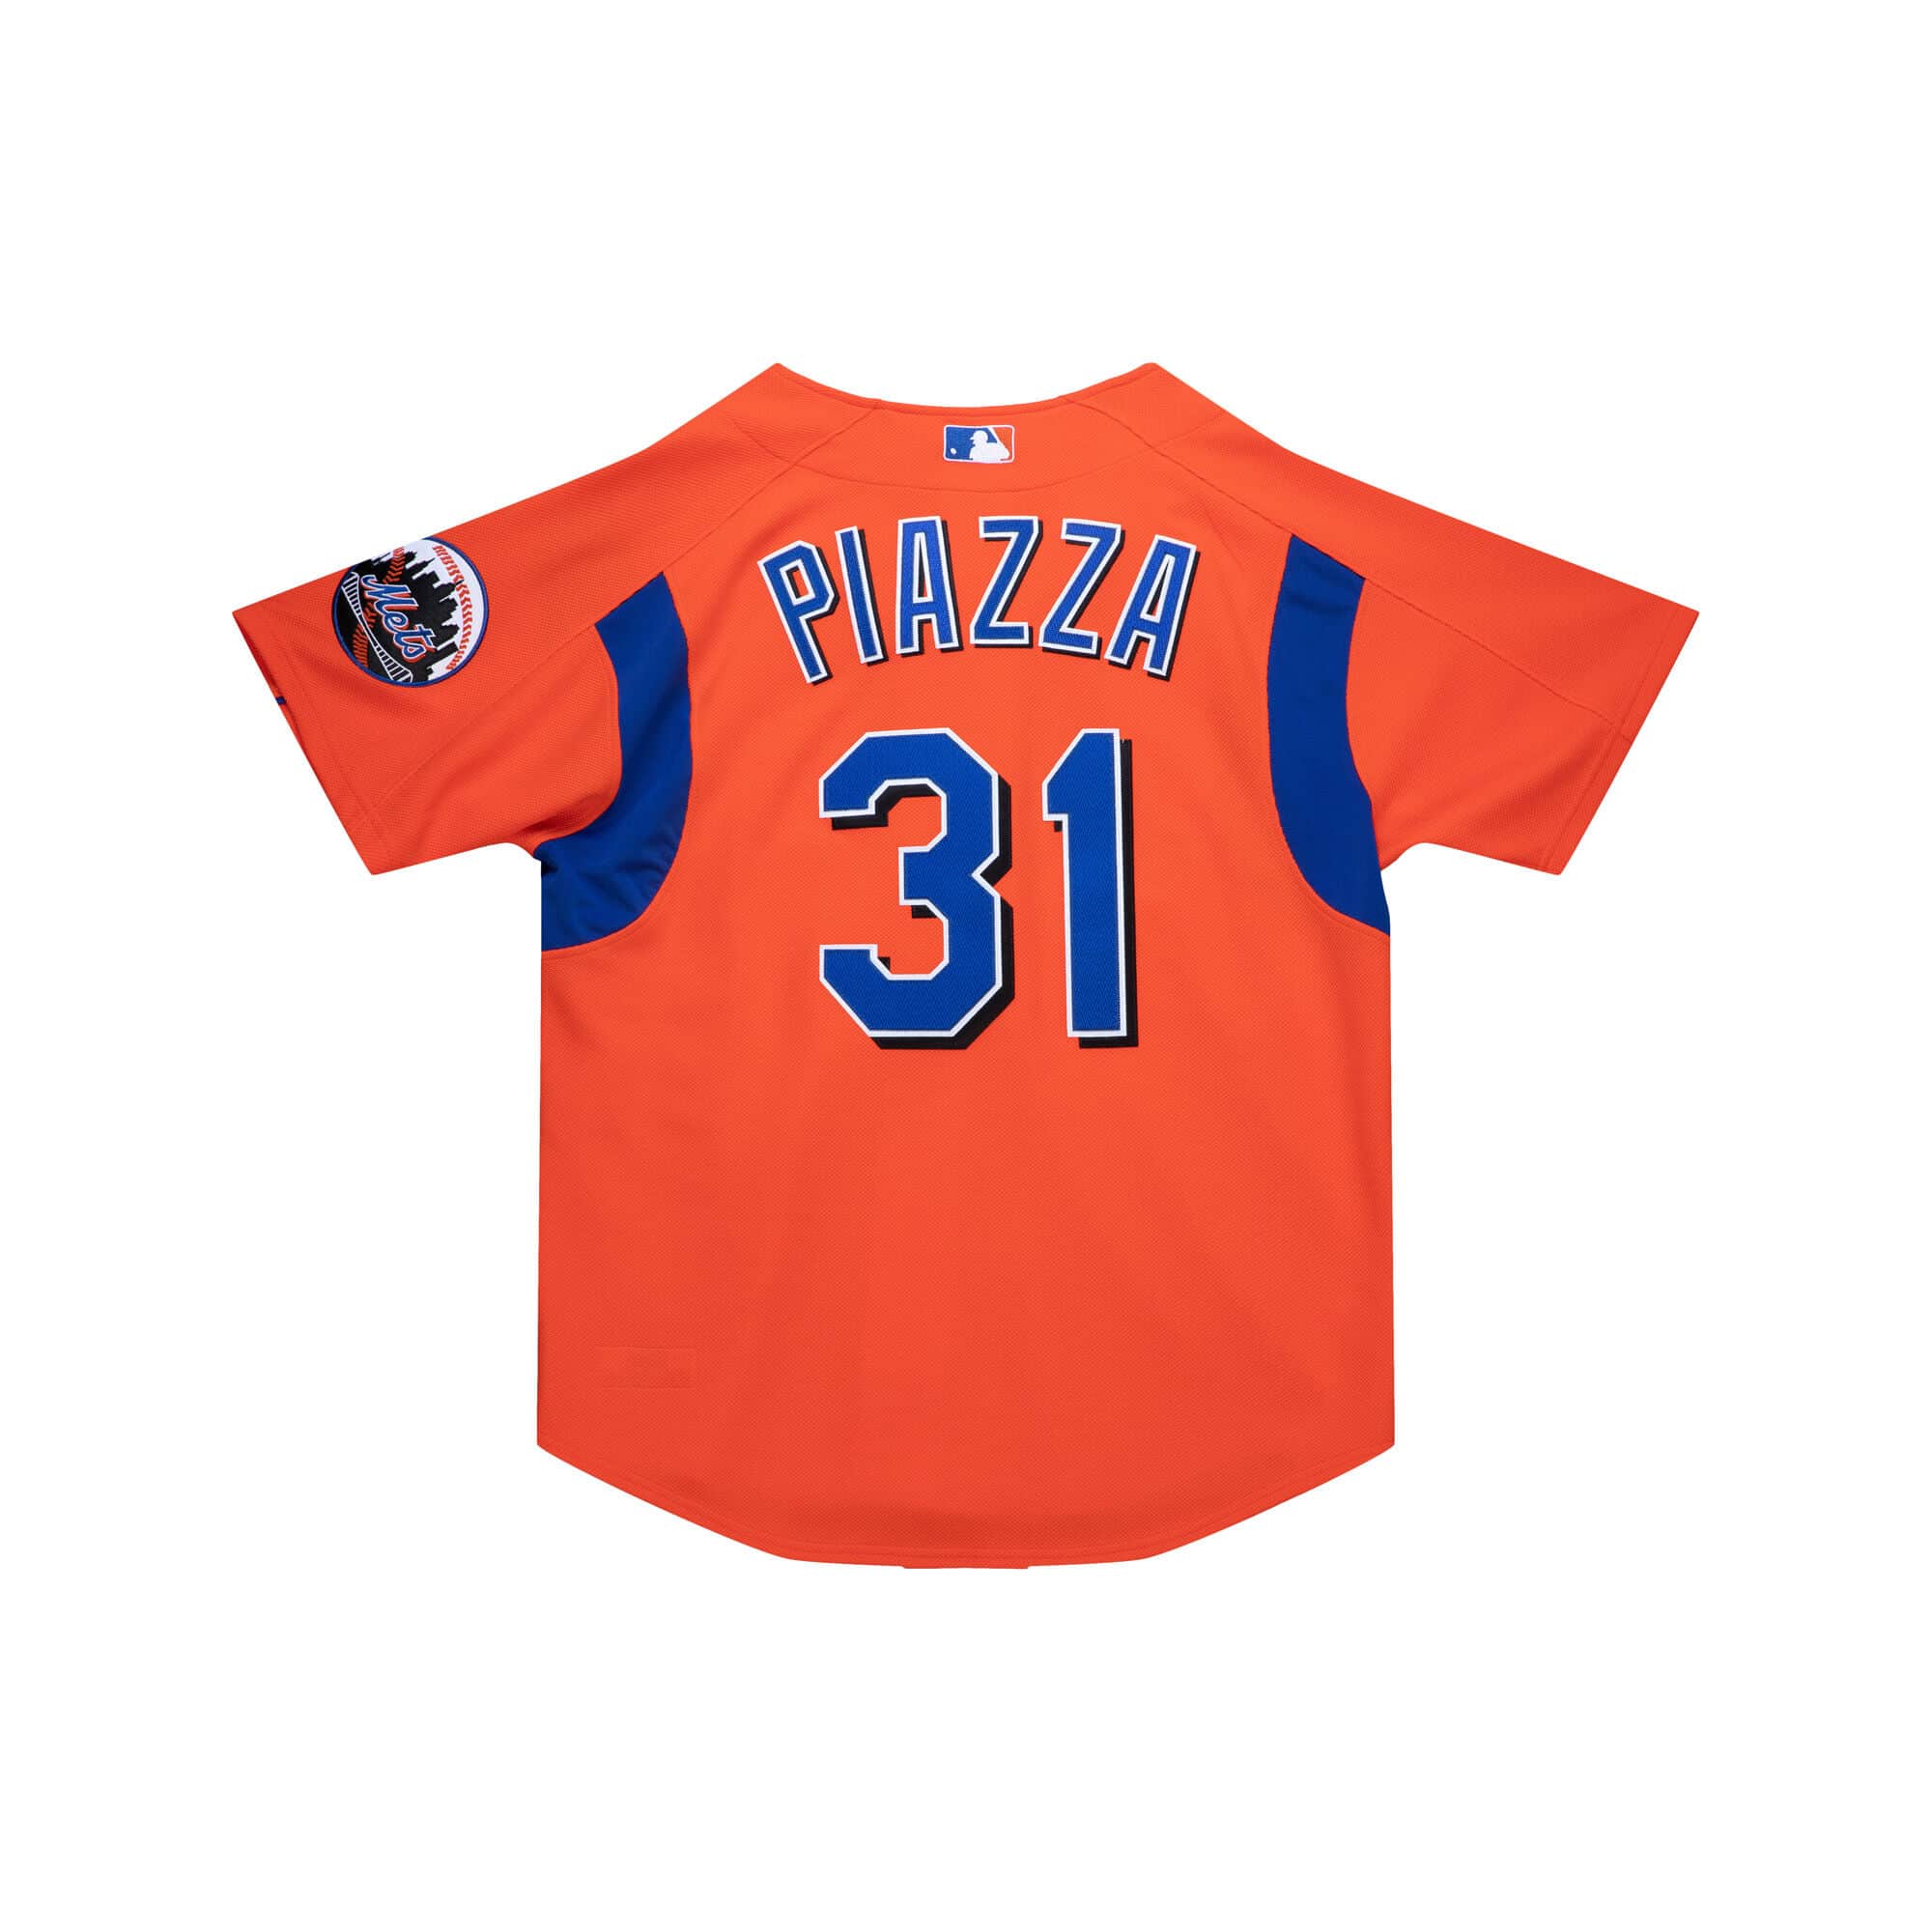 Mitchell & Ness New York Mets Mike Piazza Orange Cooperstown Collection Mesh Batting Practice Jersey